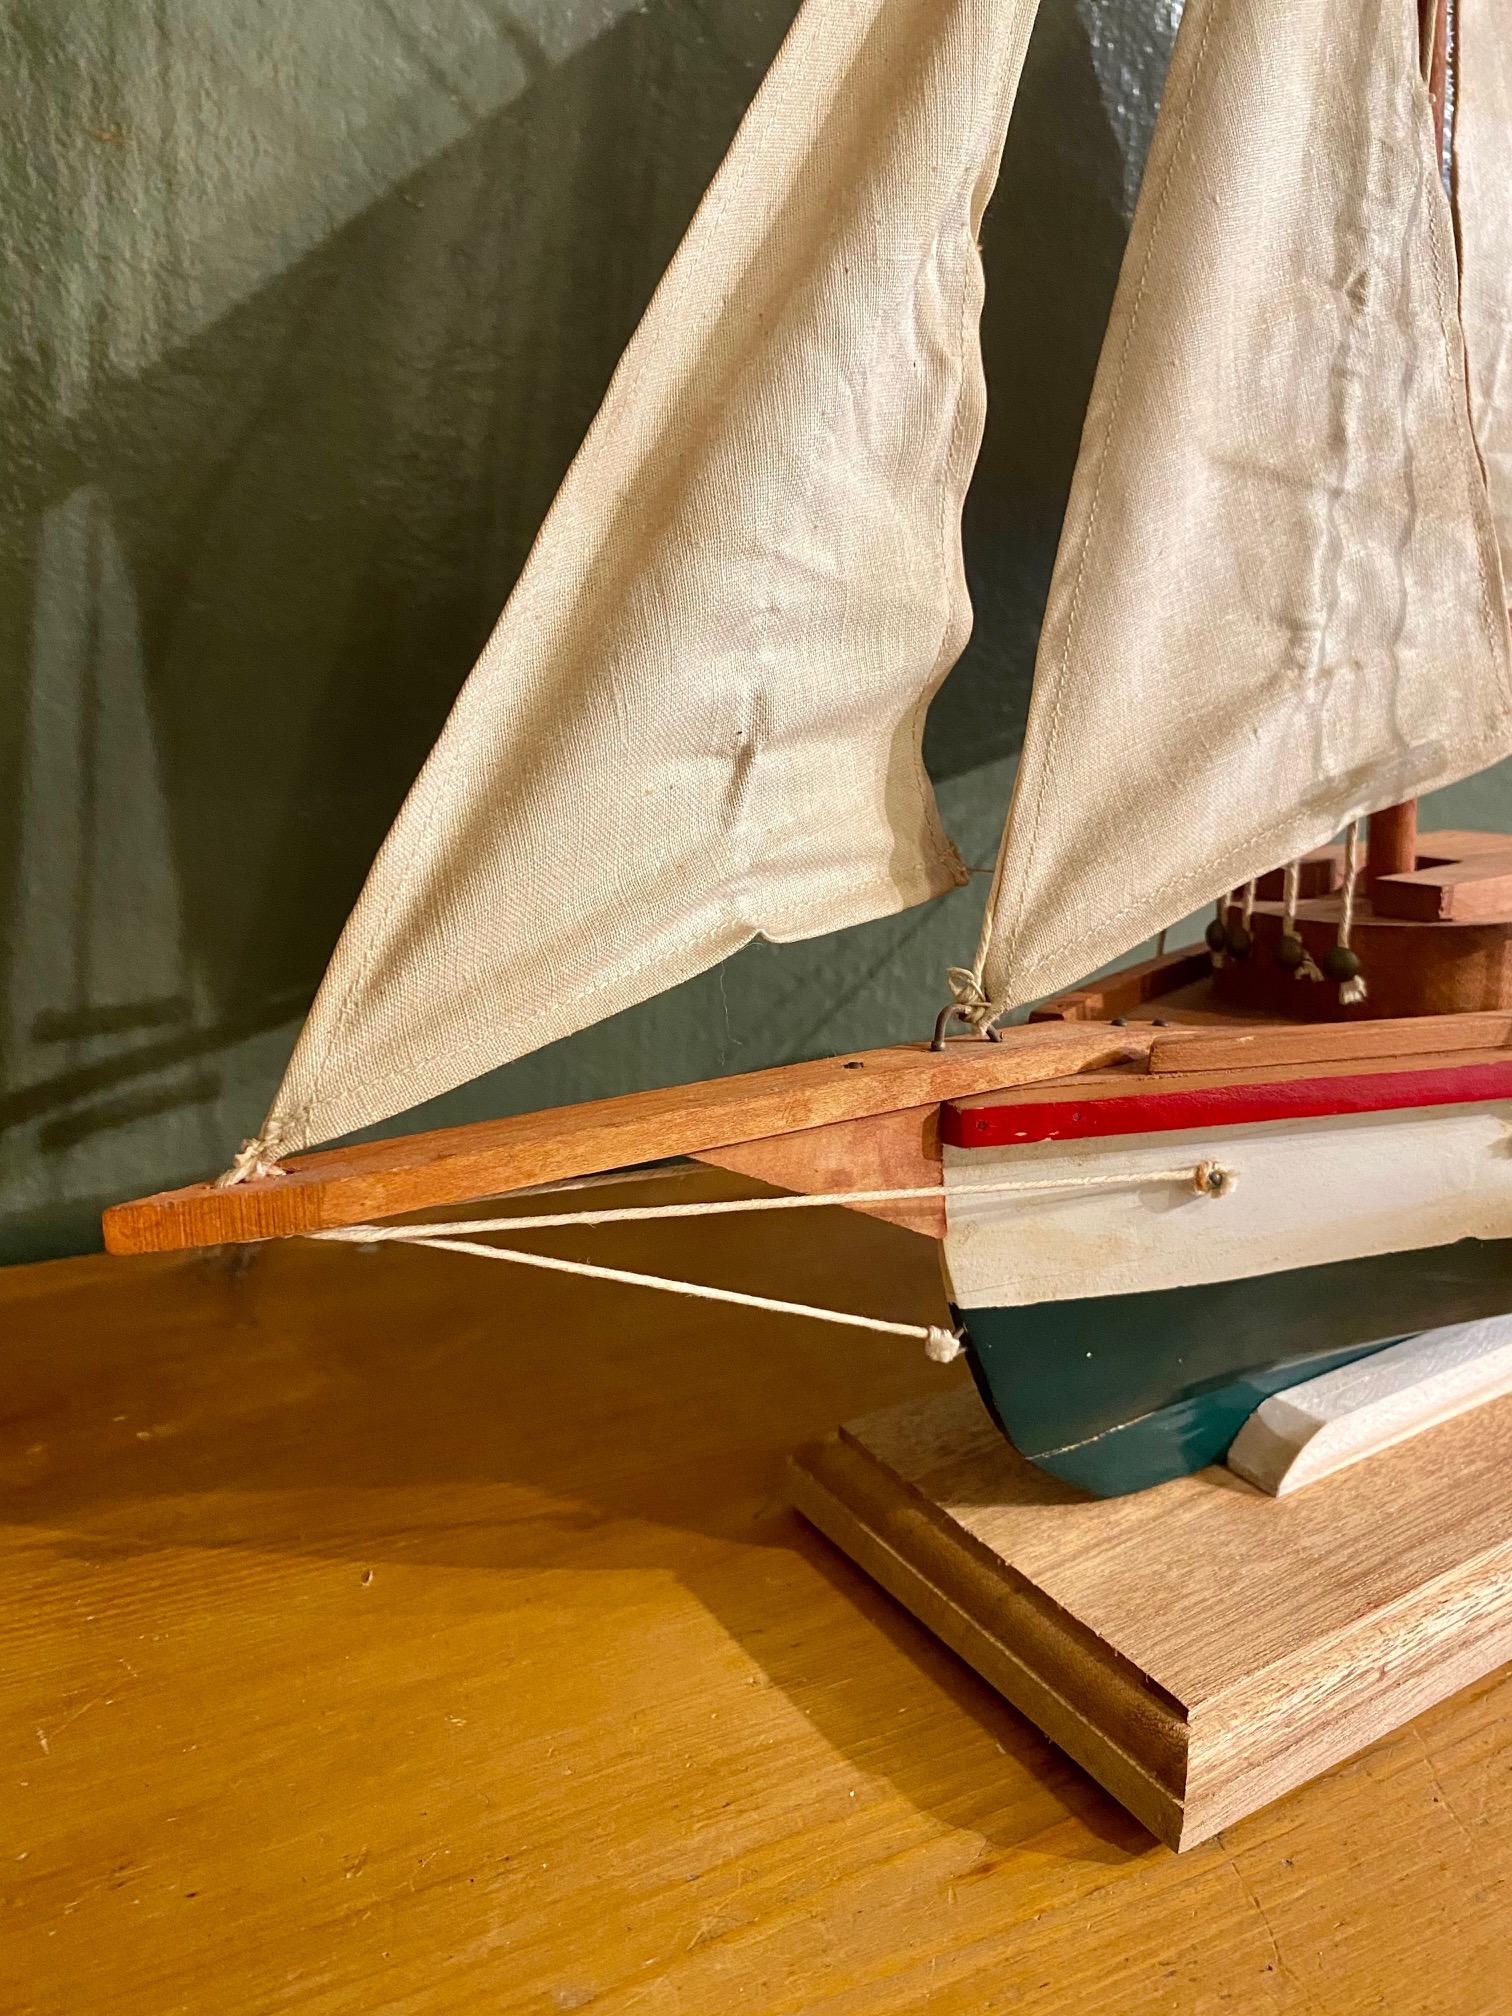 Early vintage Maine Folk Art Model of a Friendship Sloop, circa 1940s, a handmade scratch-built plank on frame model of the iconic cutter rigged sloop hailing from Friendship, Maine. Model is an accurate scale replica of the famous small craft, in